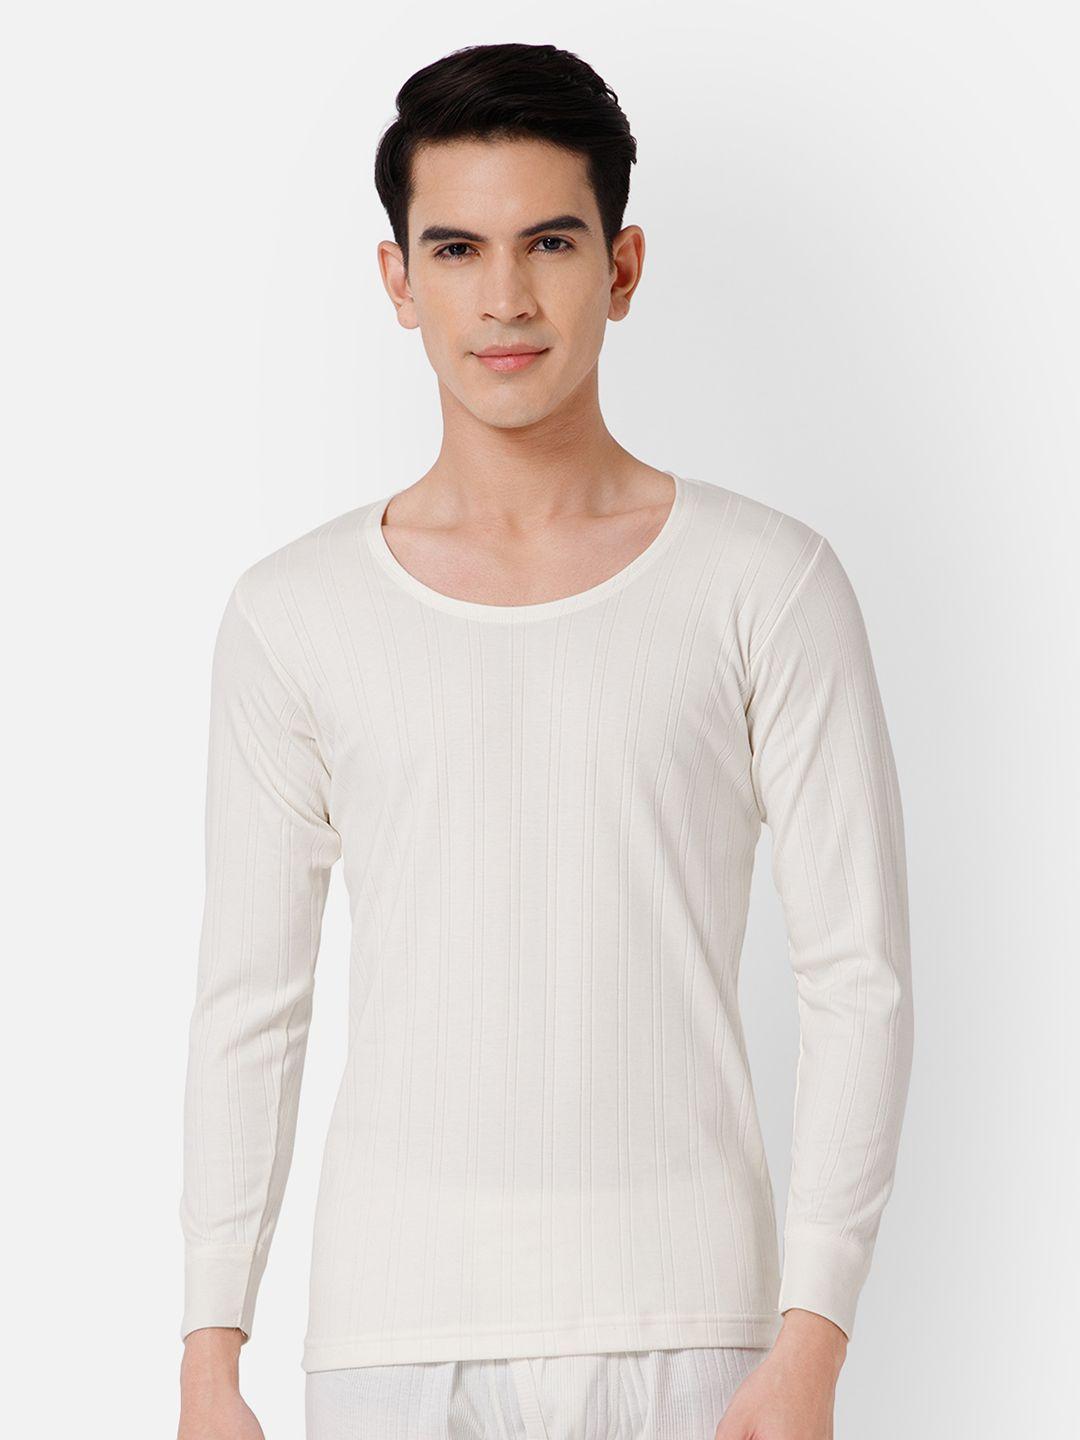 bodycare-insider-men-self-design-cotton-knitted-thermal-tops